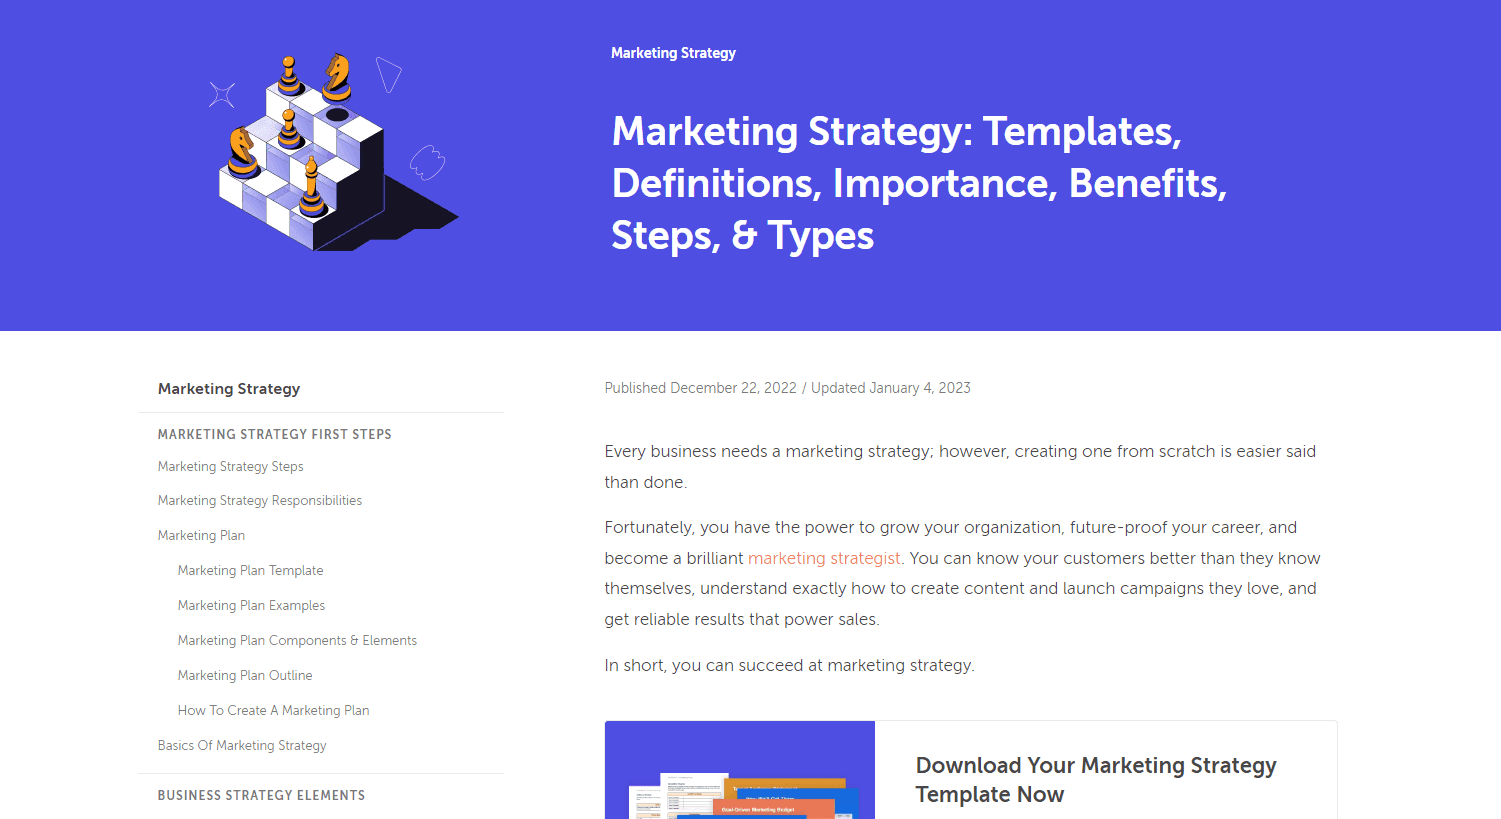 Marketing Strategy: Templates, Definitions, Importance, Benefits, Steps, & Types - CoSchedule